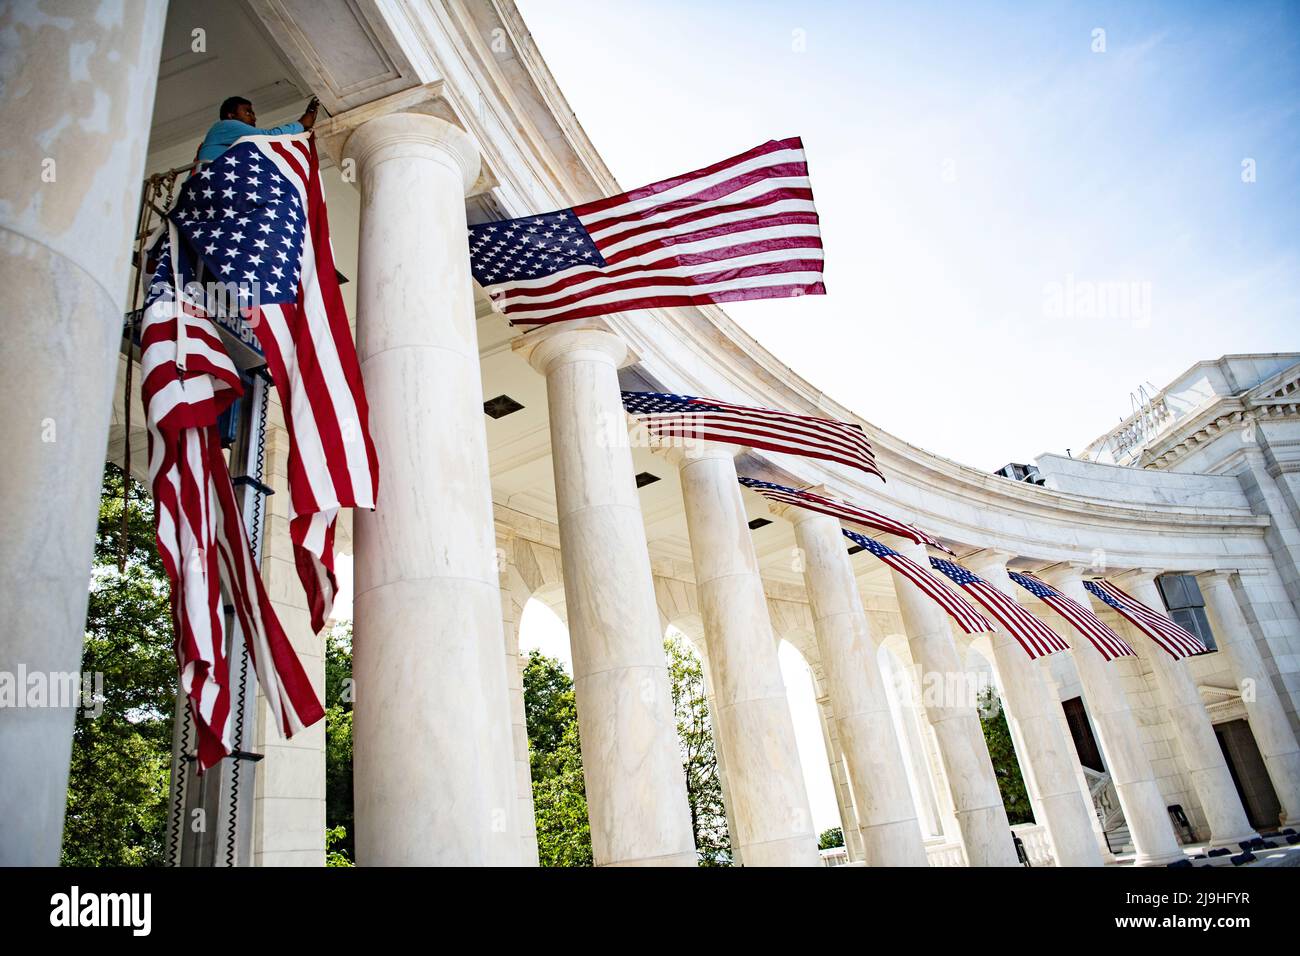 Arlington, United States Of America. 23rd May, 2022. Arlington, United States of America. 23 May, 2022. Facilities maintenance employees hang American flags in the Arlington National Cemetery Memorial Amphitheater in preparation for the annual Memorial Day event honoring the nations war dead, May 23, 2022 in Arlington, Virginia, USA. Credit: Elizabeth Fraser/U.S. Army/Alamy Live News Stock Photo